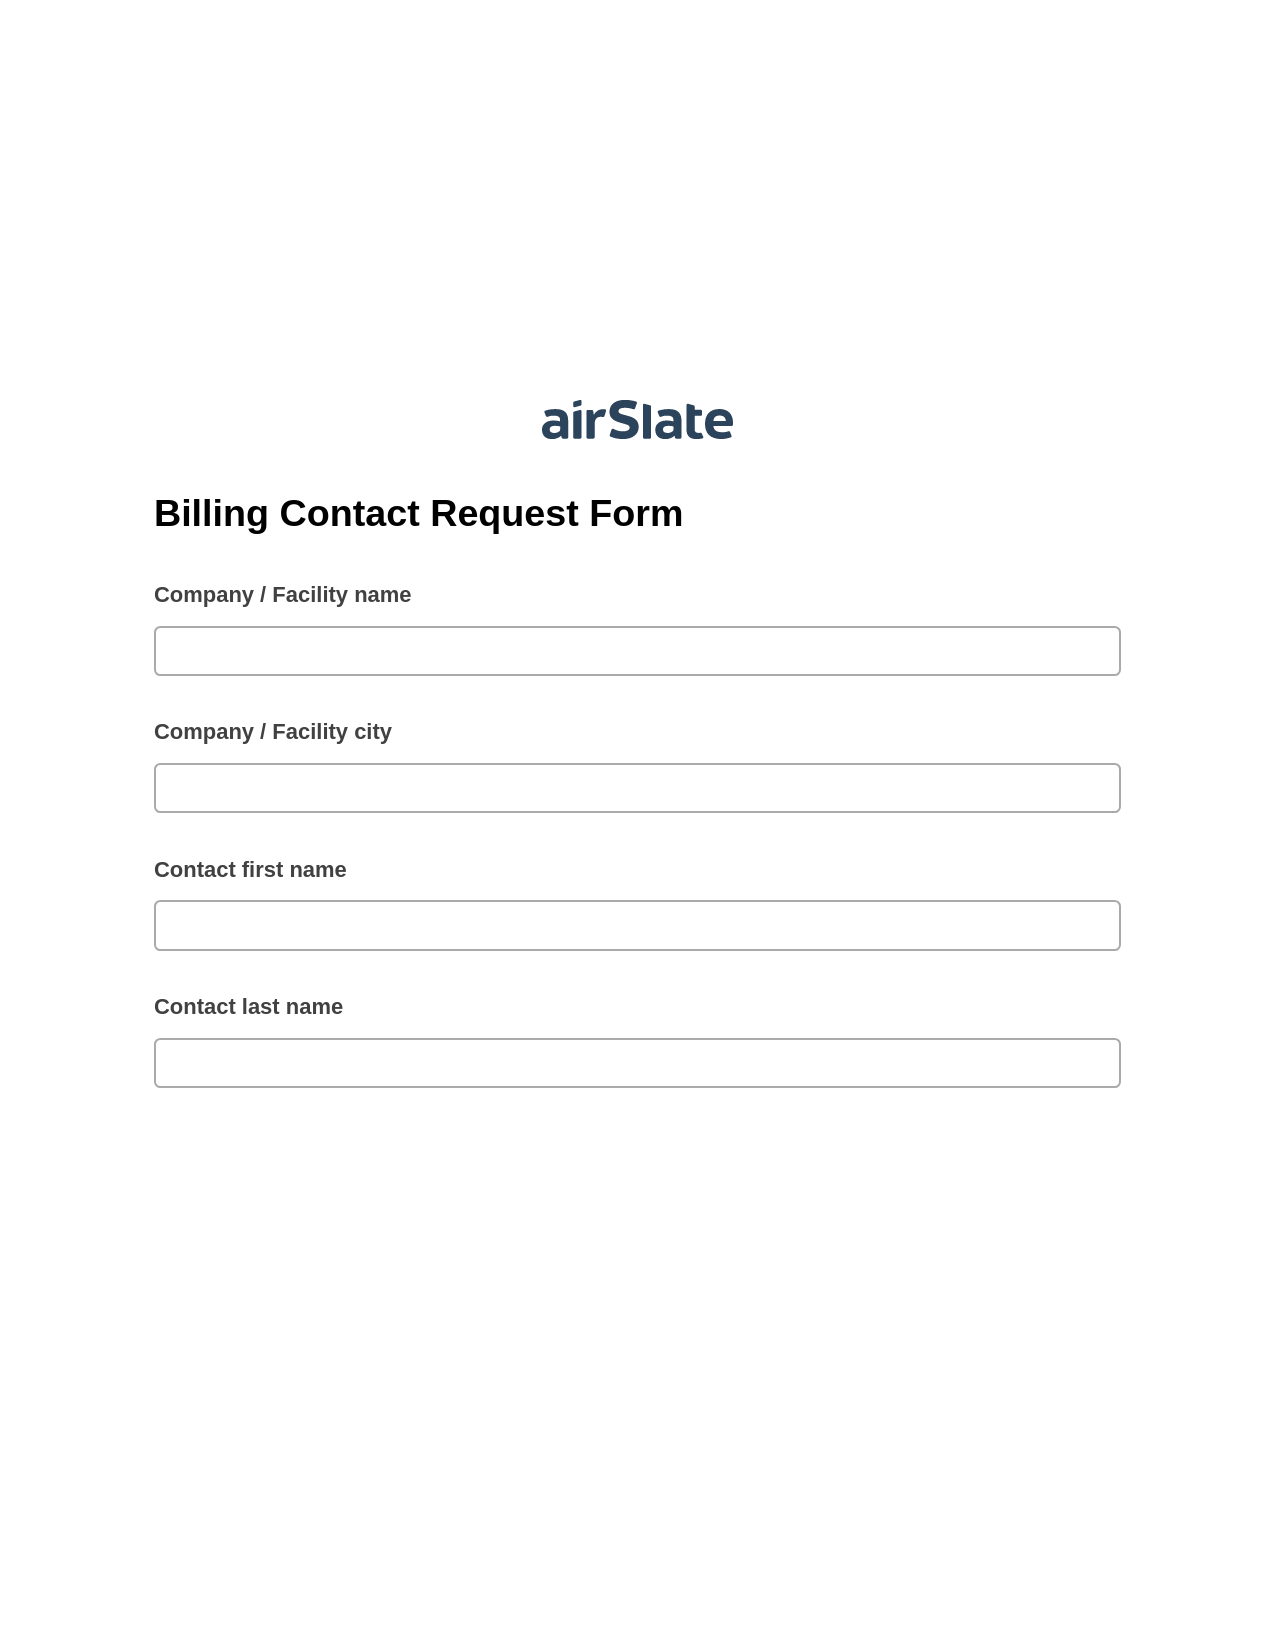 Billing Contact Request Form Pre-fill Slate from MS Dynamics 365 Records Bot, Send Mailchimp Campaign Bot, Post-finish Document Bot